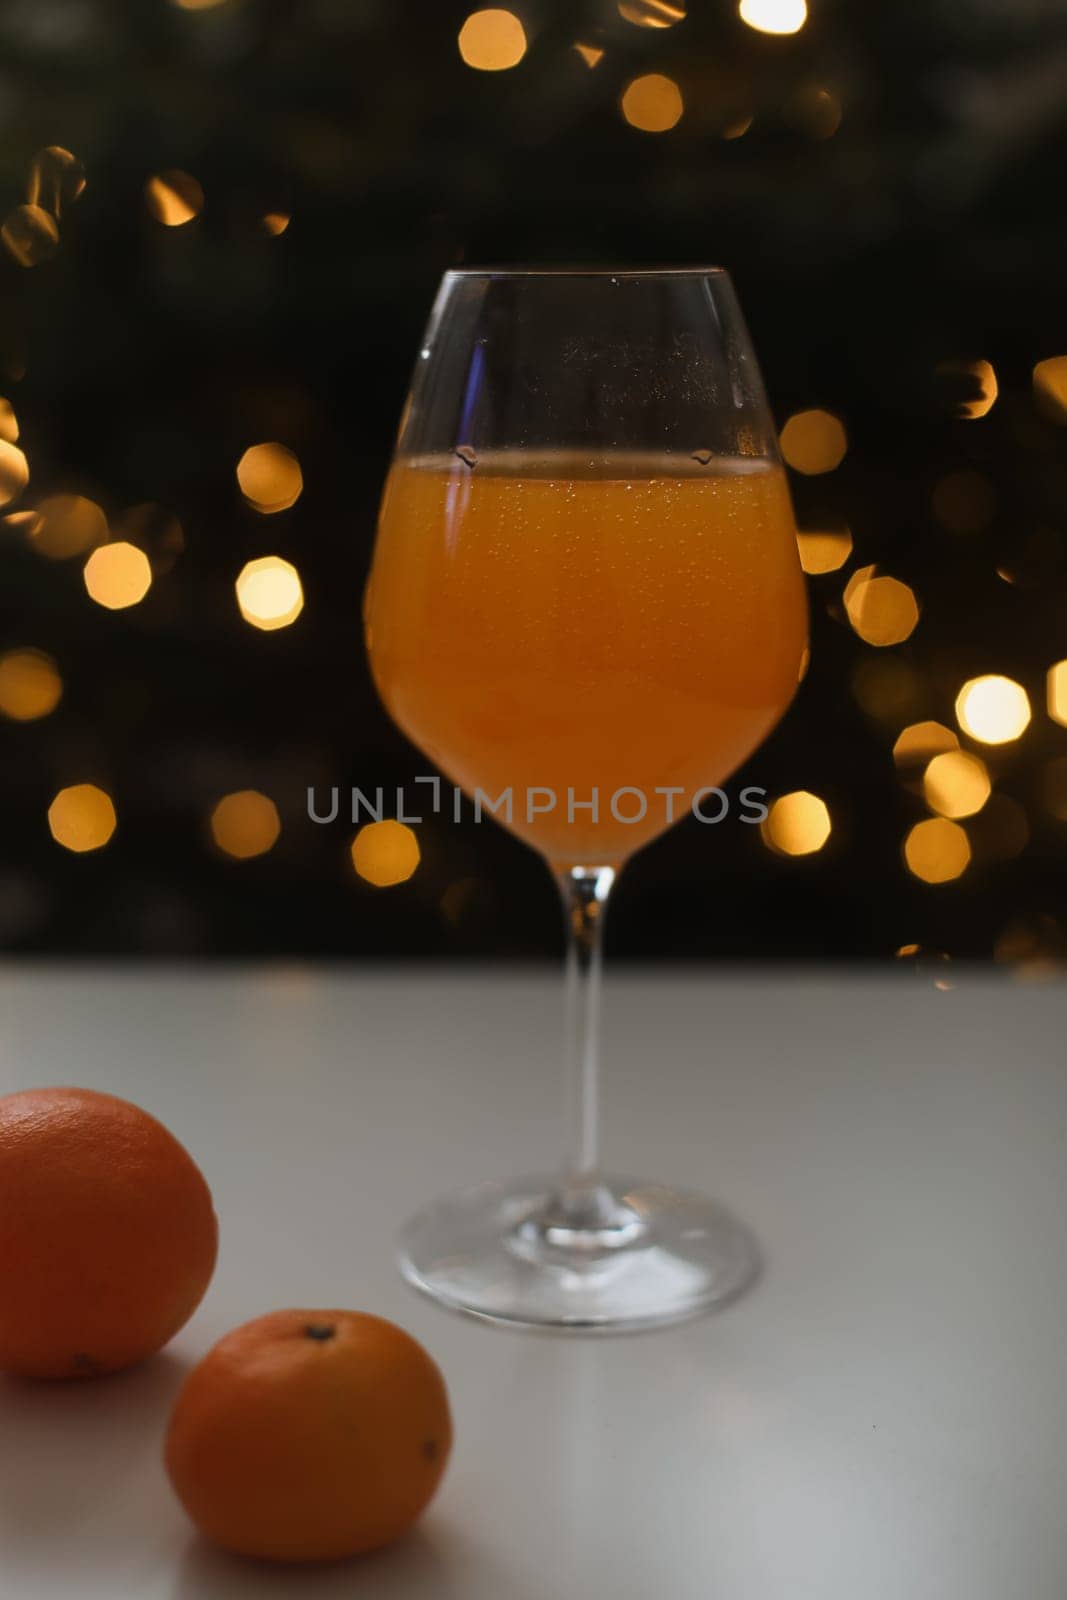 tangerine juice with tangerines on the background of the Christmas. High quality photo